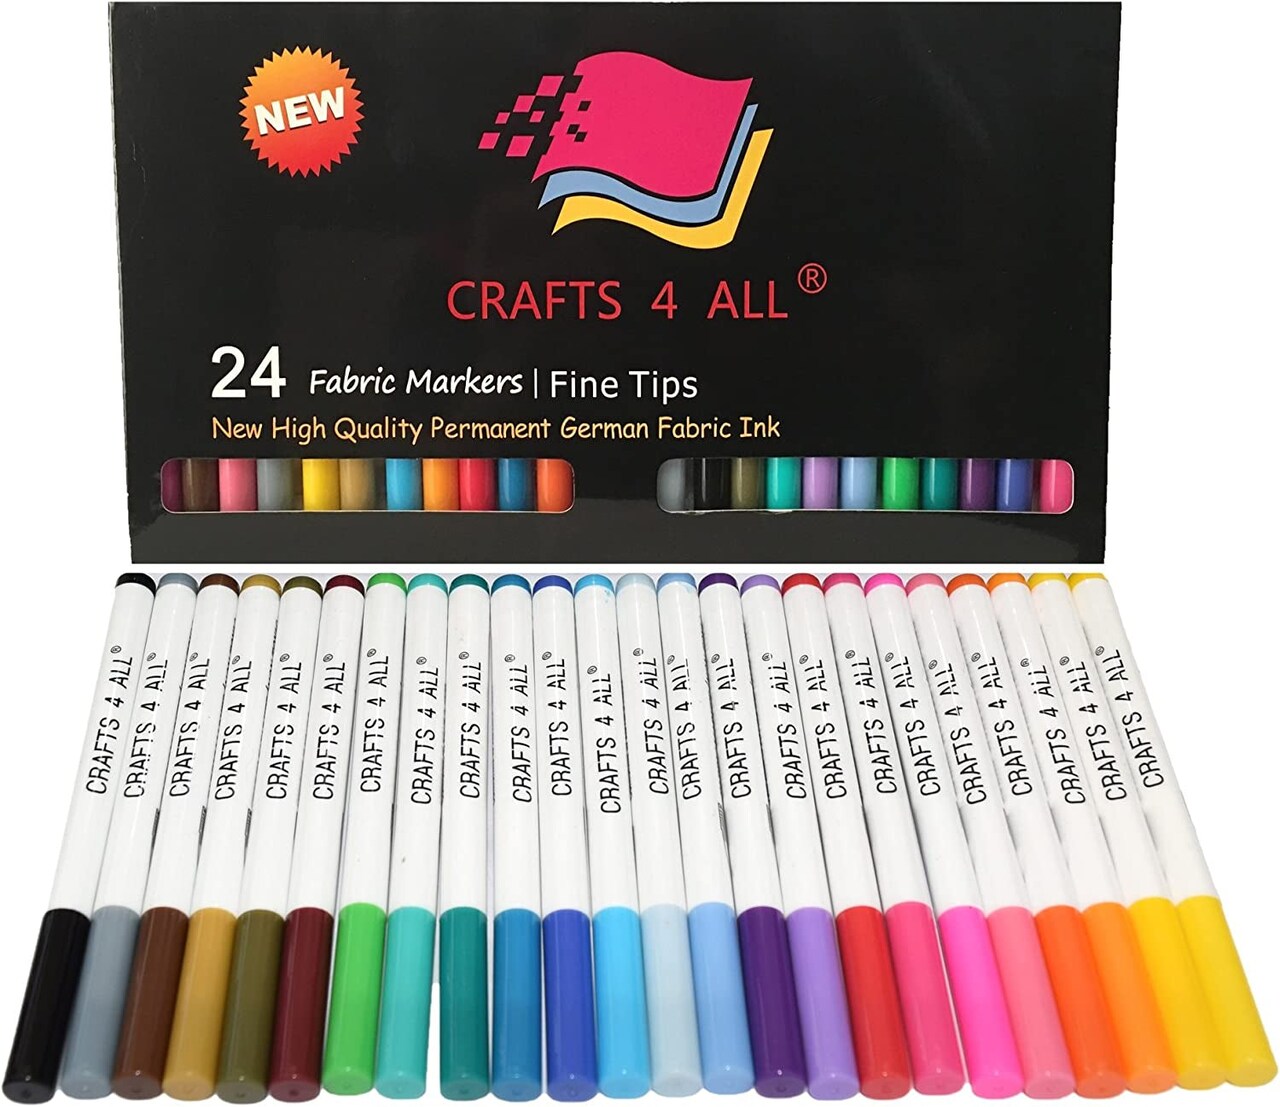 Fabric Markers for Kids & Adults - 36 Dual Tip, Water-Based, Permanent  Fabric Marker Pens W/Minimal Bleed for Decorating Canvas, T Shirts and  Other